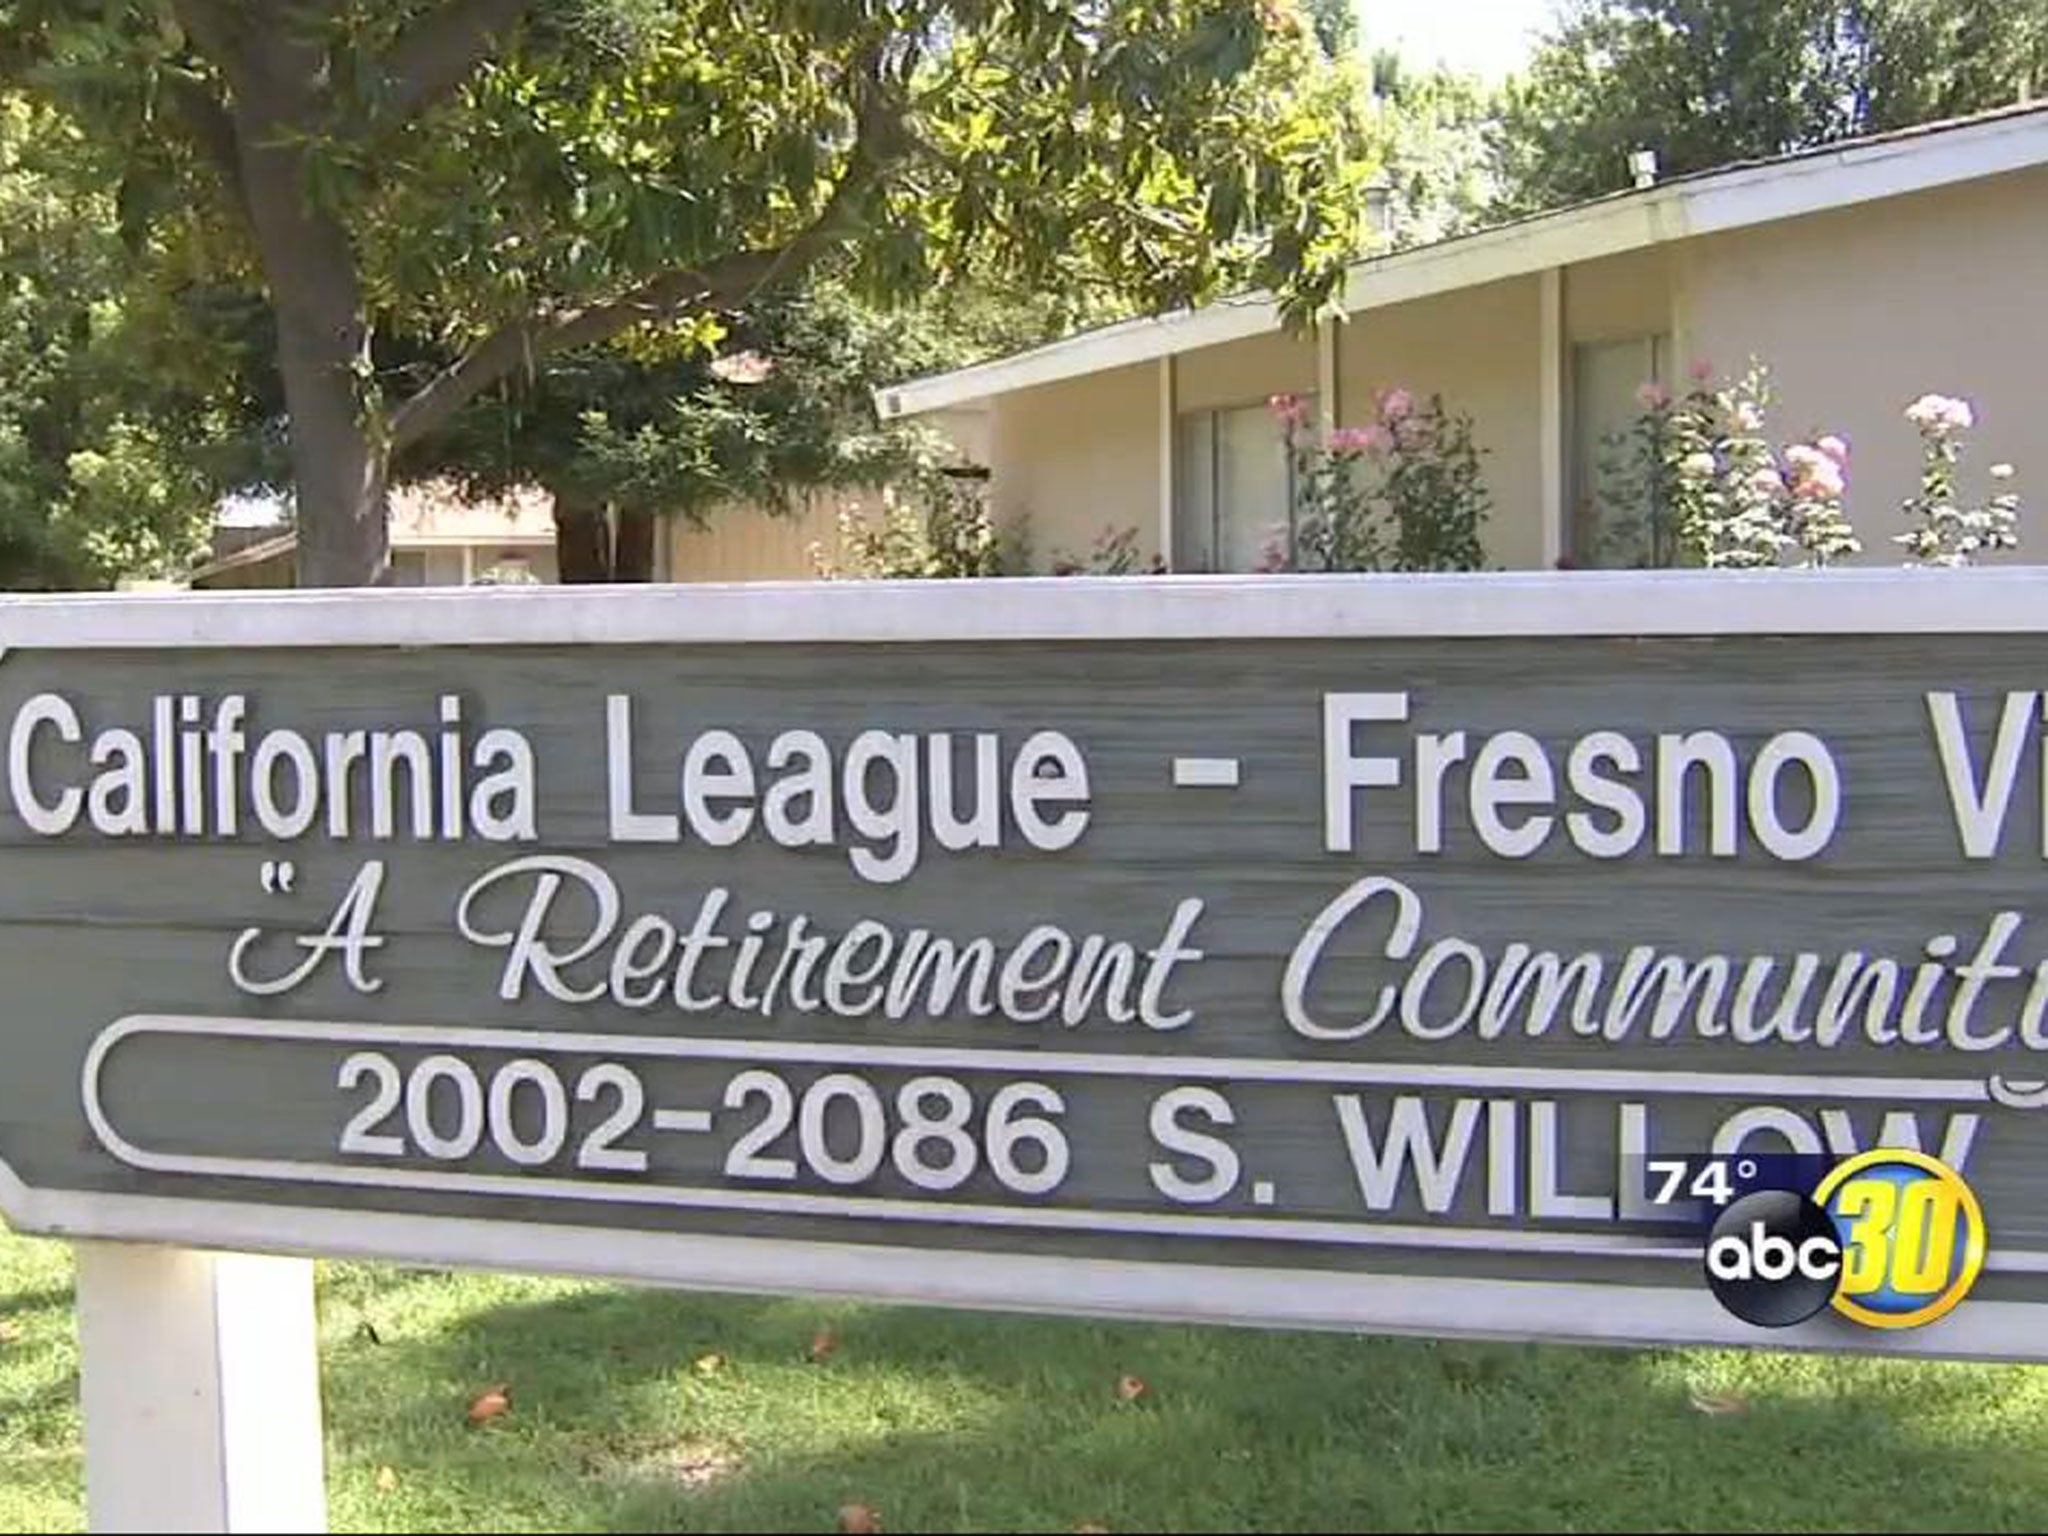 Police in California were left stunned after discovering a methamphetamine lab situated in the heart of a California retirement community.